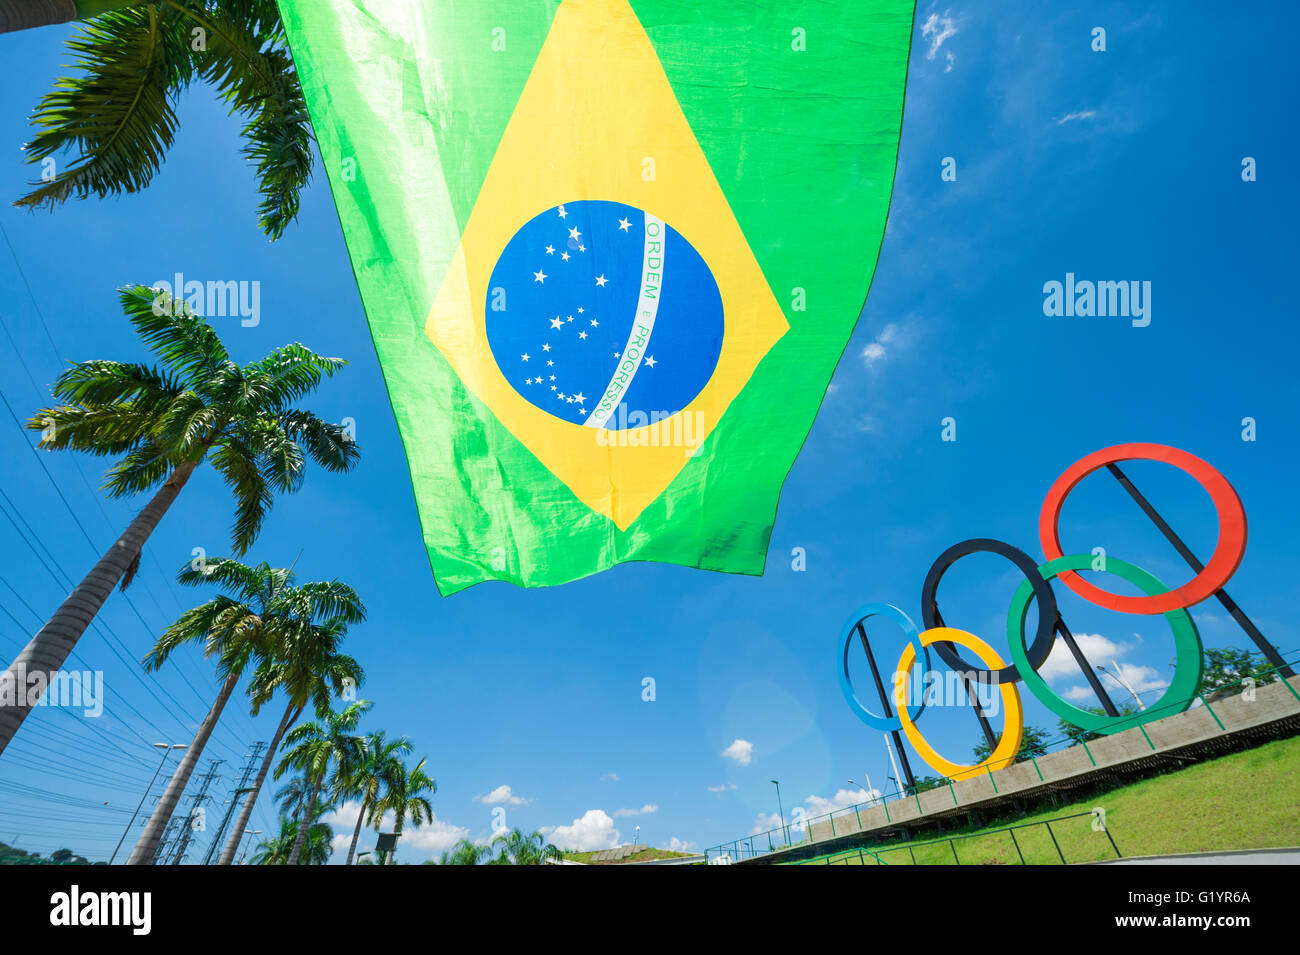 RIO DE JANEIRO - MARCH 18, 2016: A Brazil flag hangs in front of a display of Olympic rings in Parque Madureira Park, Zona Norte Stock Photo